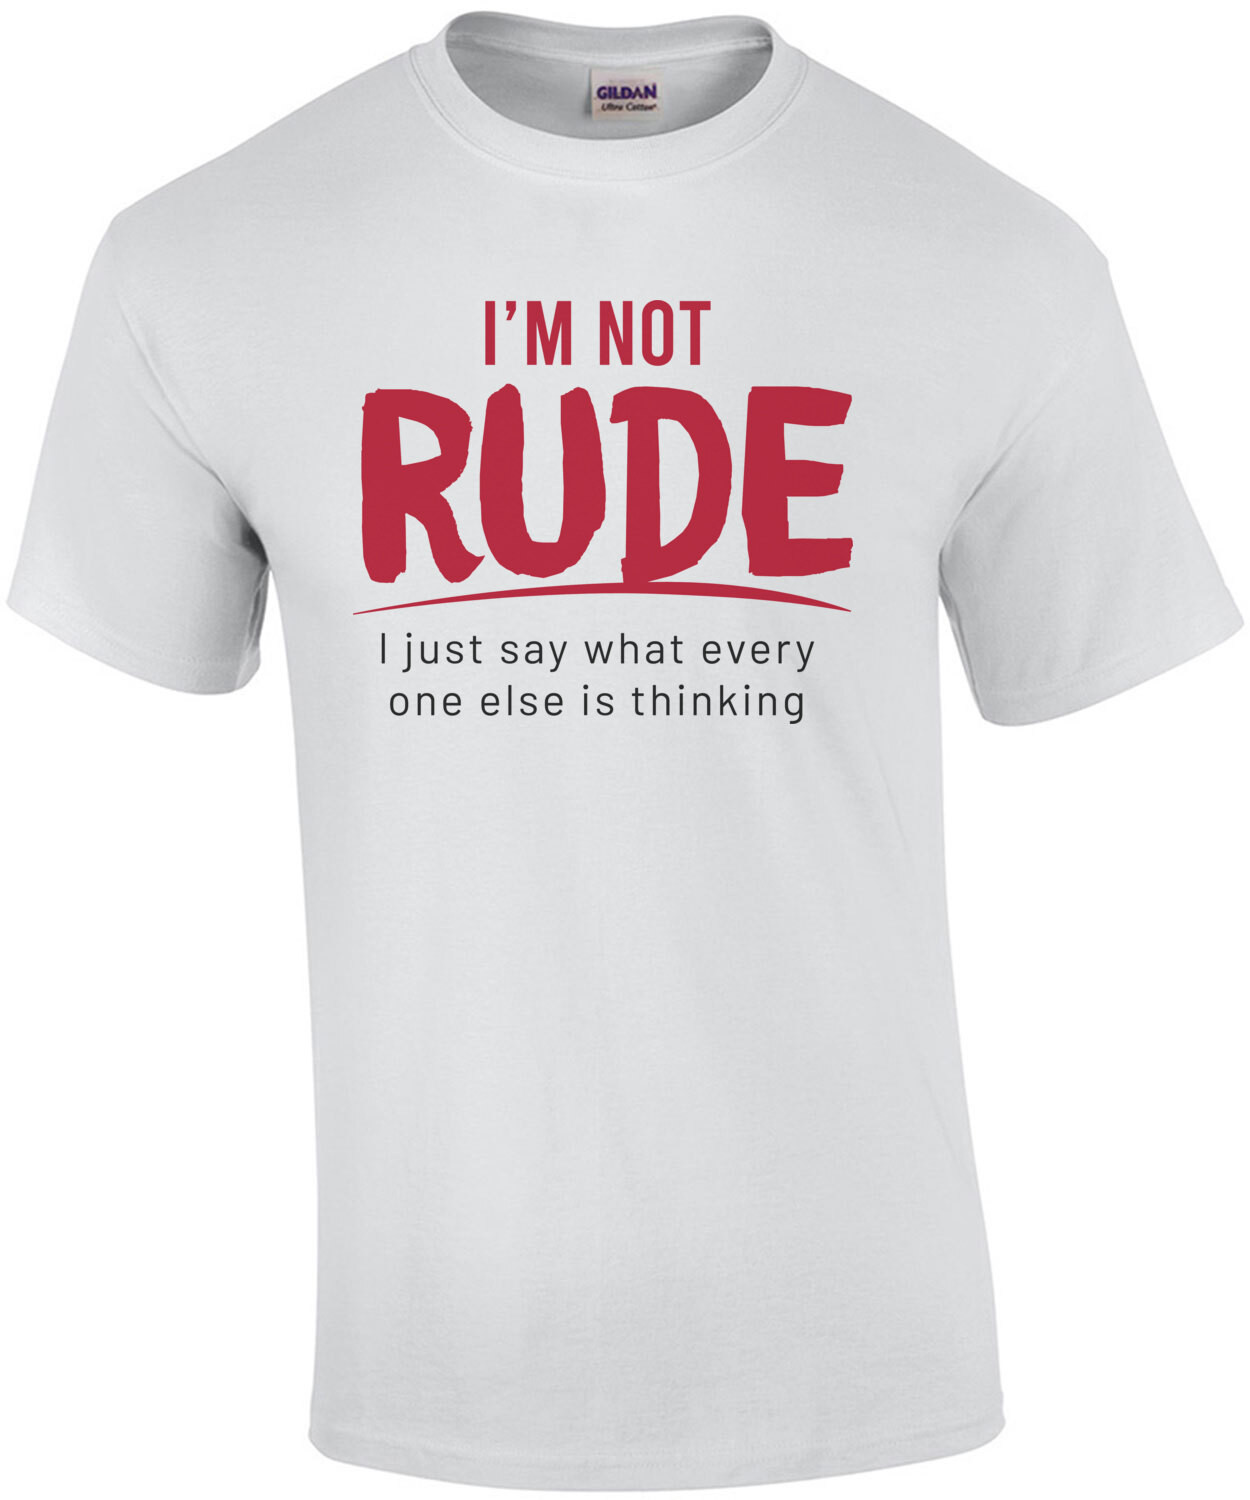 I'm not rude - I just say what every one else is thinking - sarcastic t-shirt